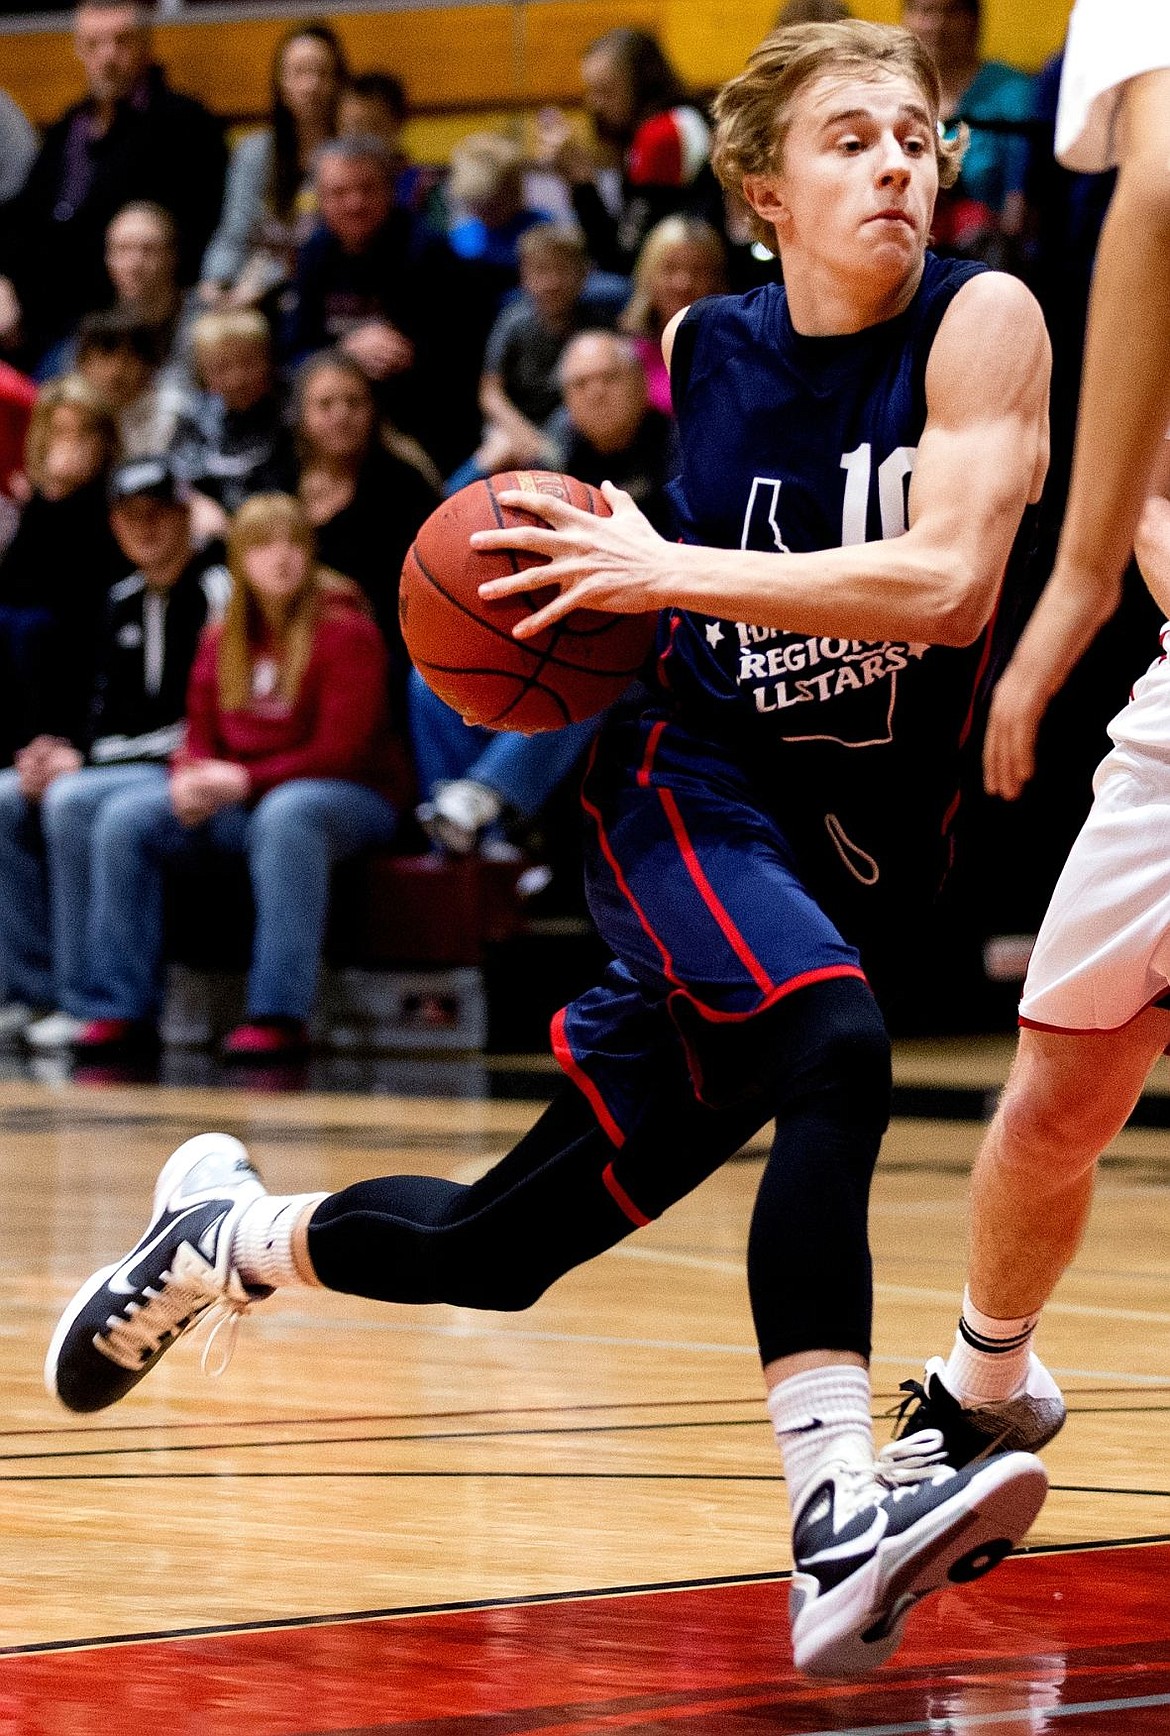 &lt;p&gt;JAKE PARRISH/Press Region's Jakob Lynn, of Coeur d'Alene High School, drives to the basket at the 13th Annual High School All Star Game on Saturday at North Idaho College. Lynn later broke his right arm in the game.&lt;/p&gt;